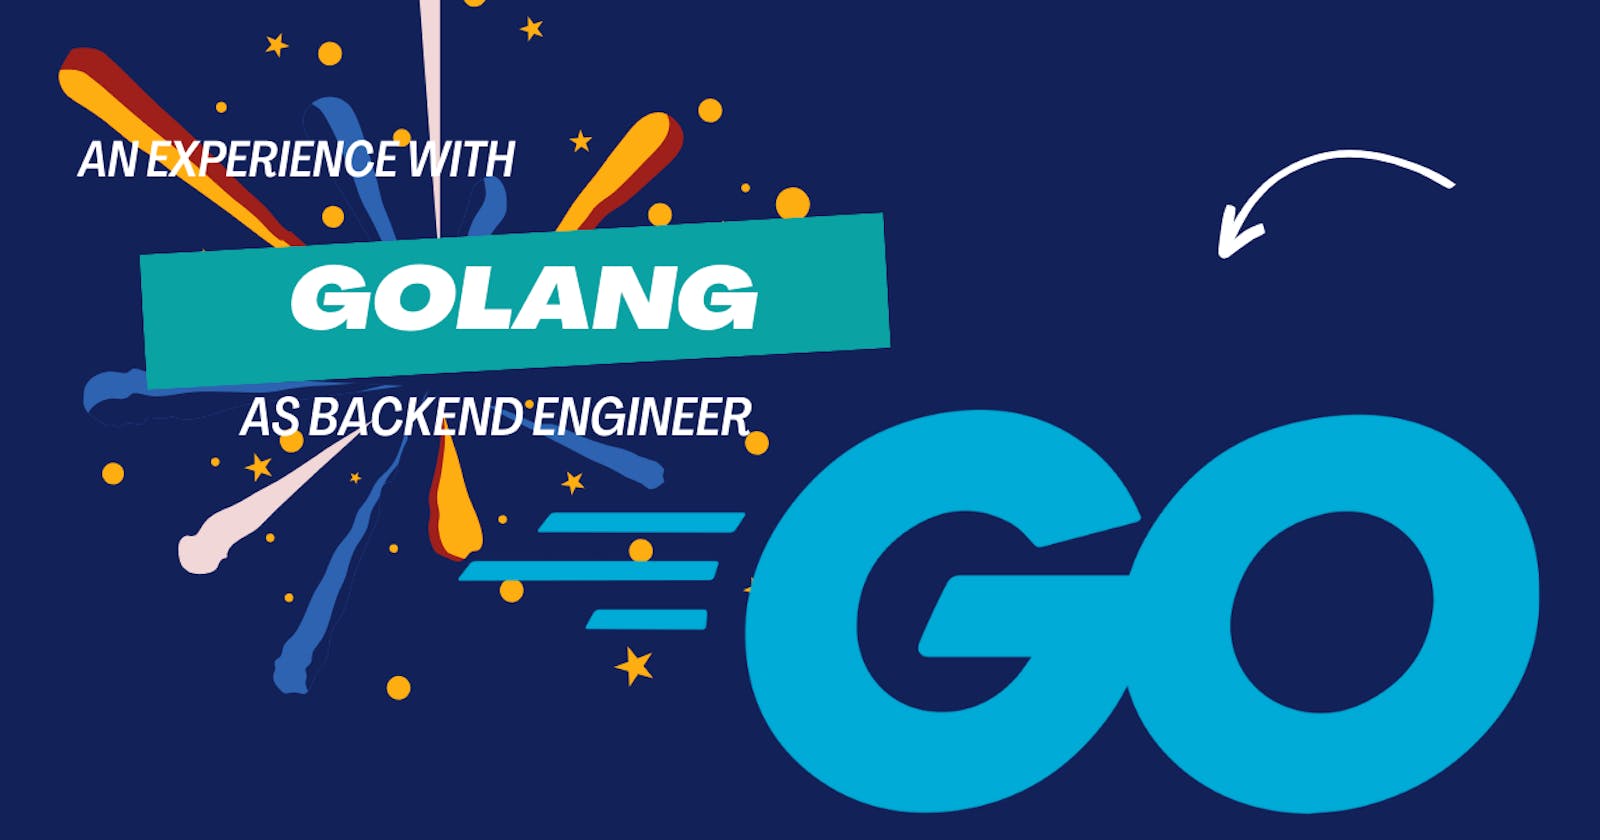 An experience with Golang as a Backend Engineer